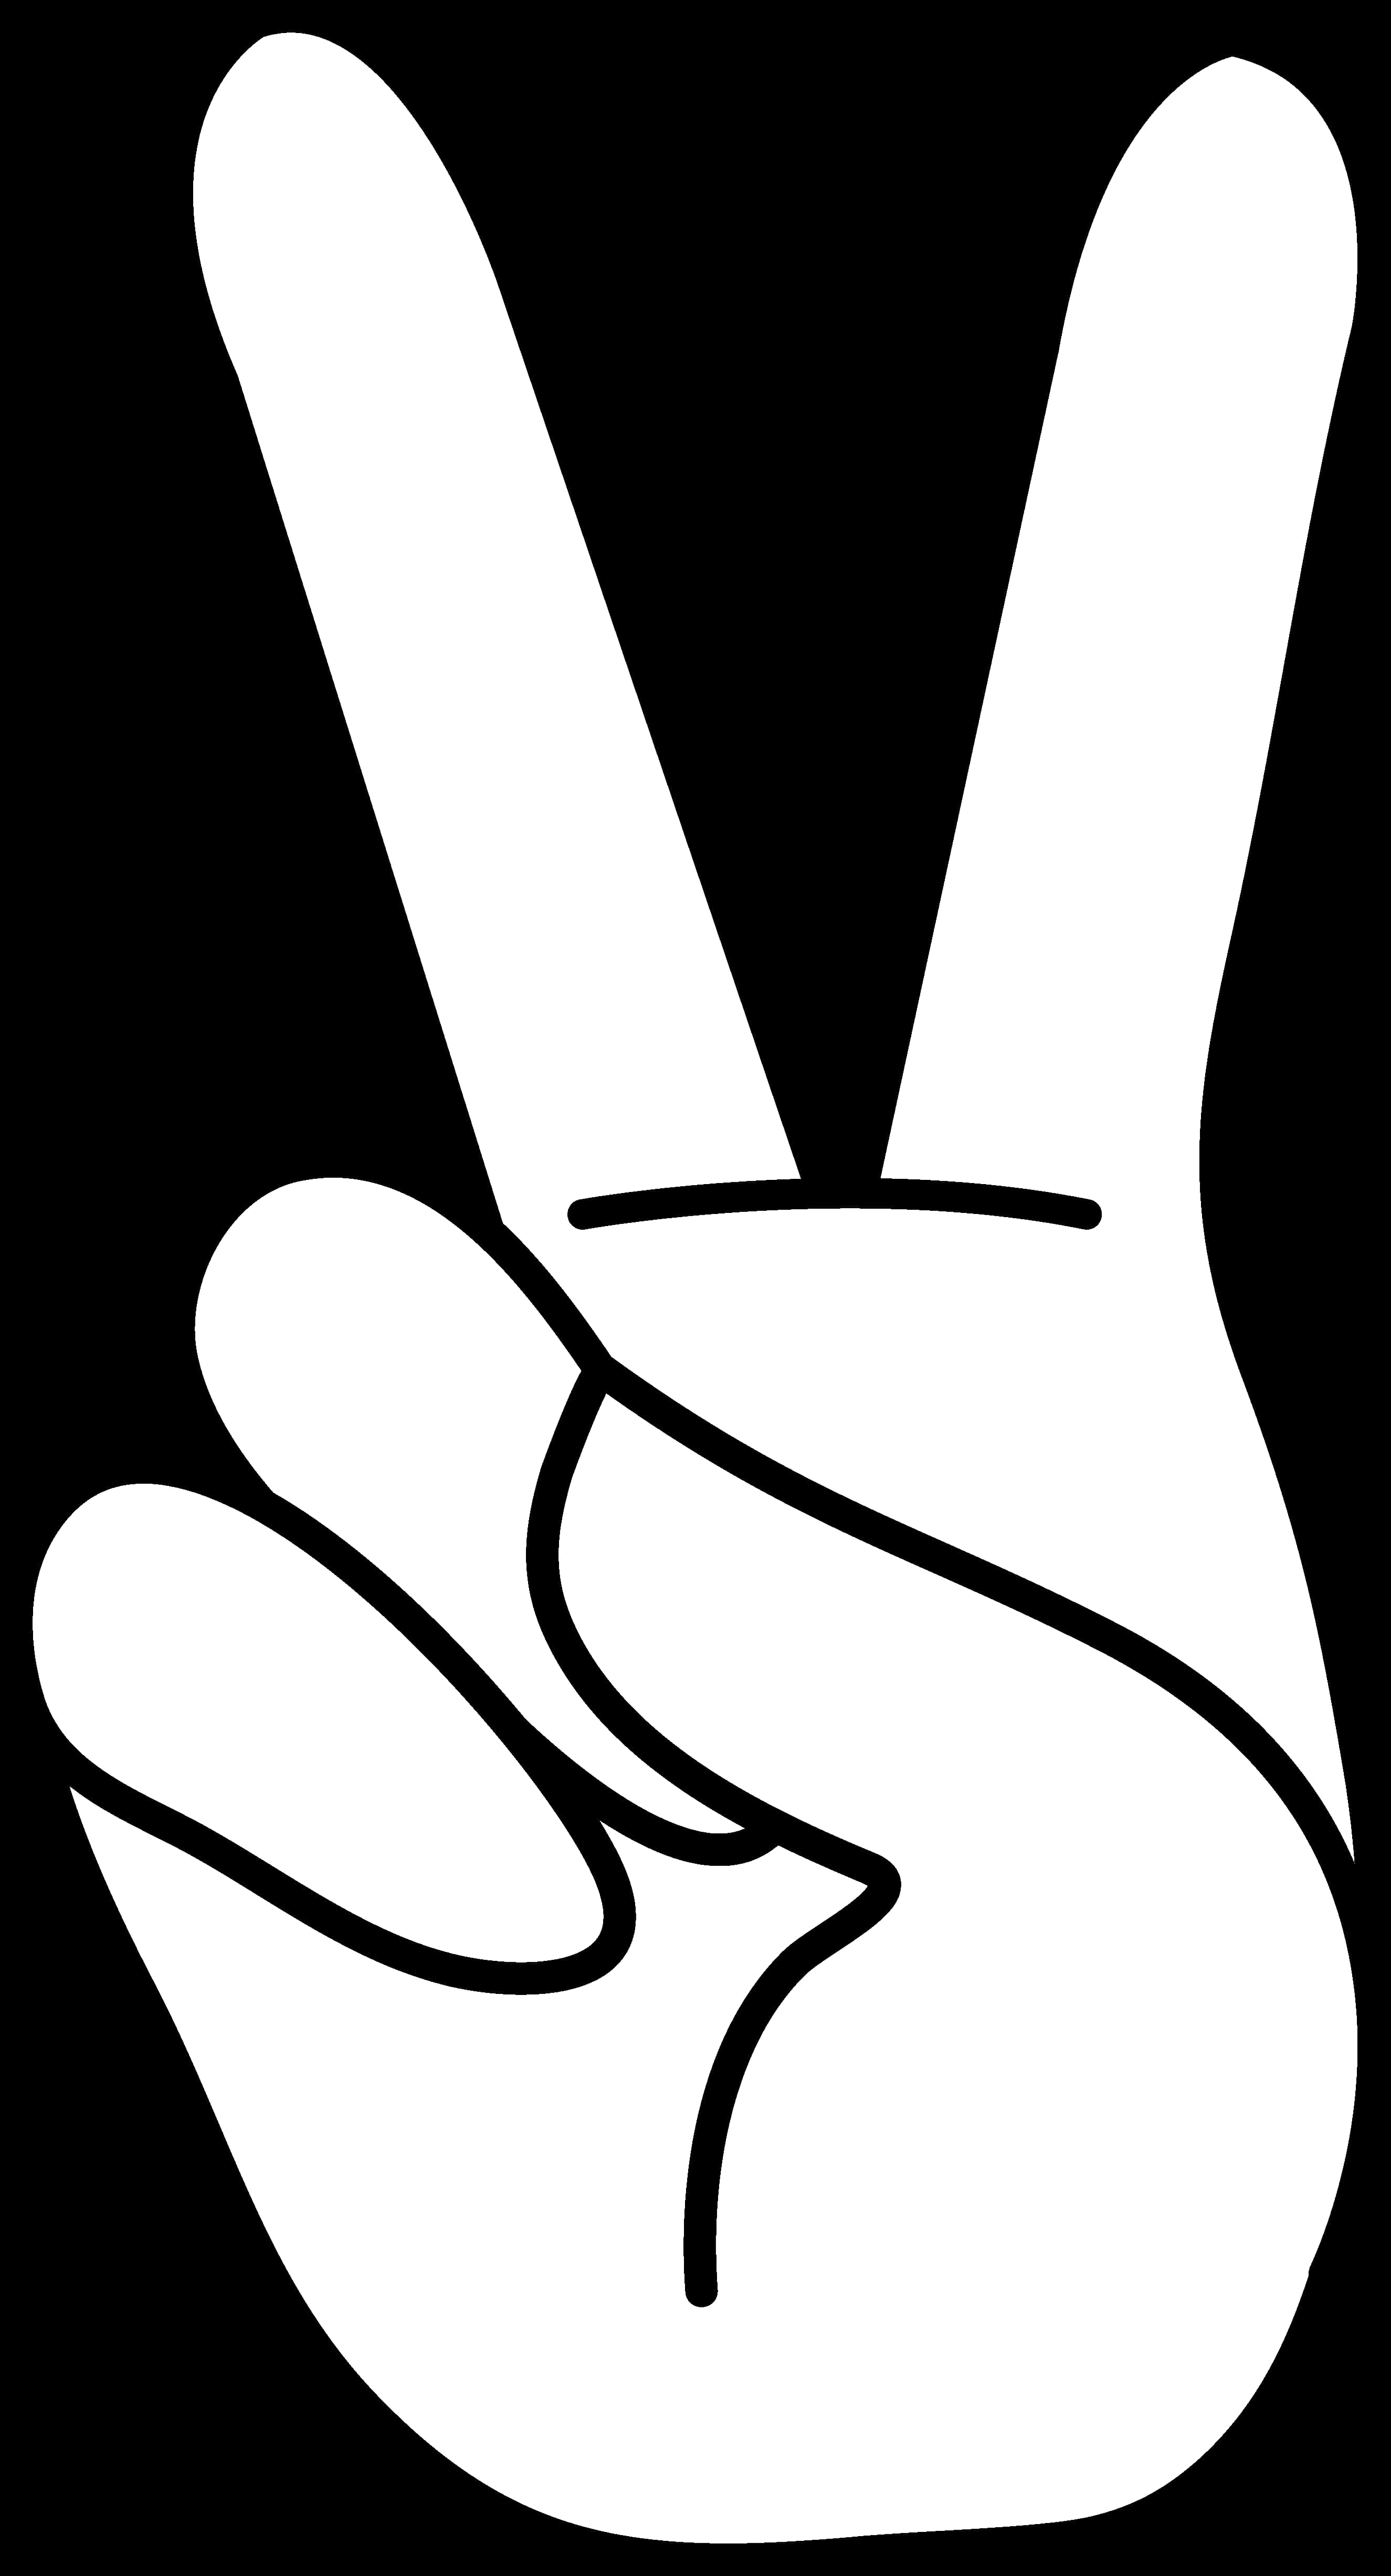 Peace Sign Hand Gesture Graphic PNG